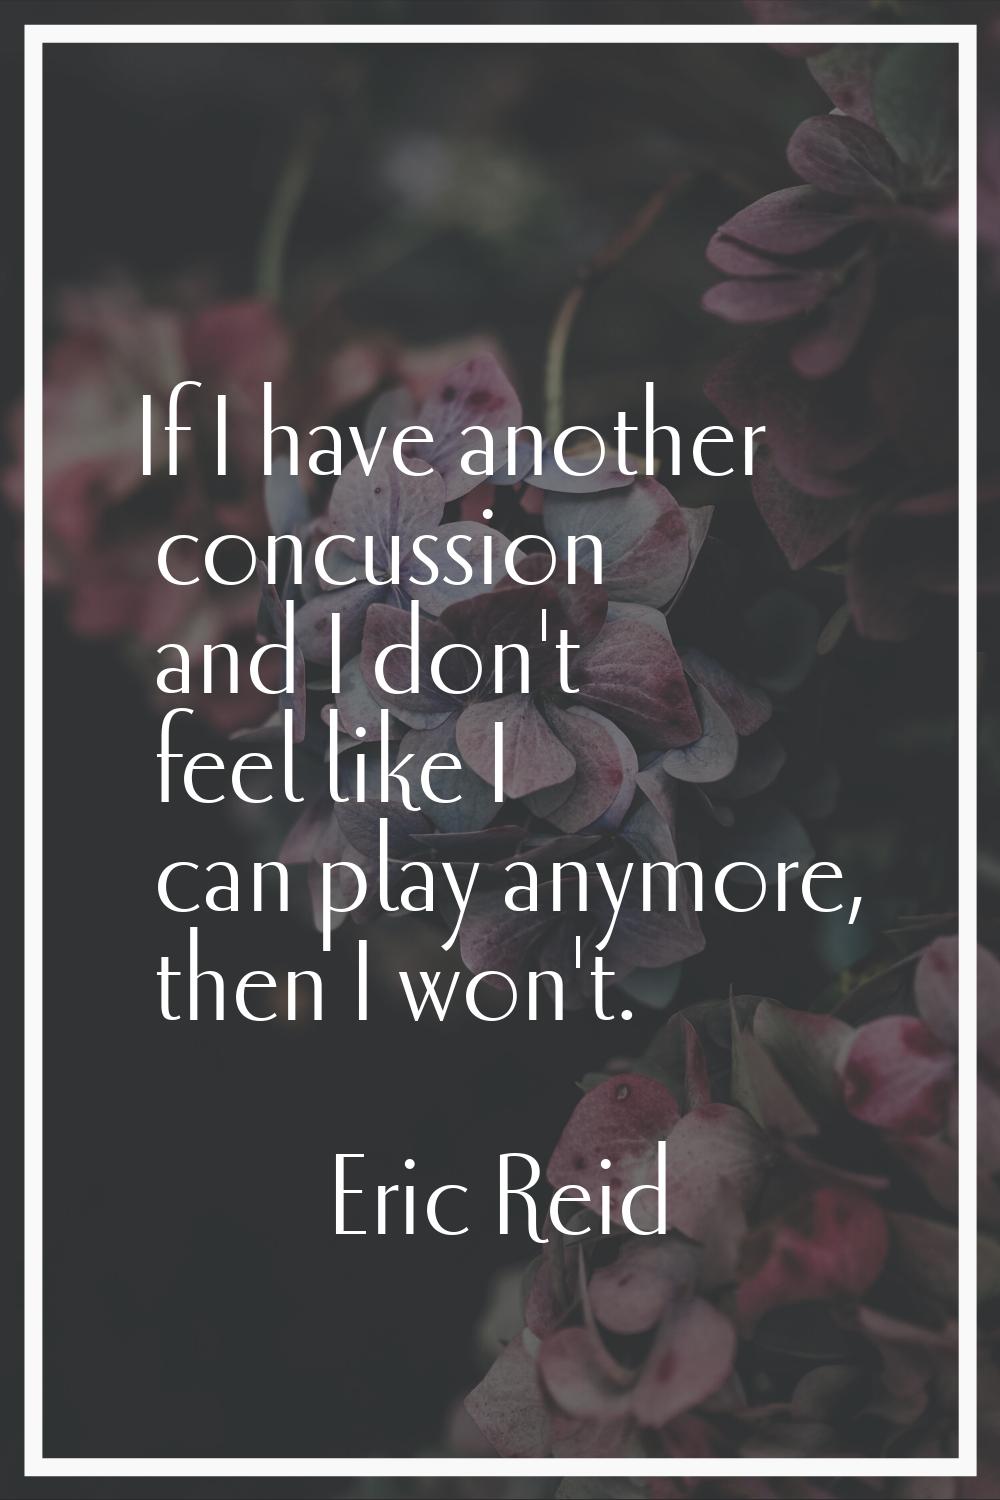 If I have another concussion and I don't feel like I can play anymore, then I won't.